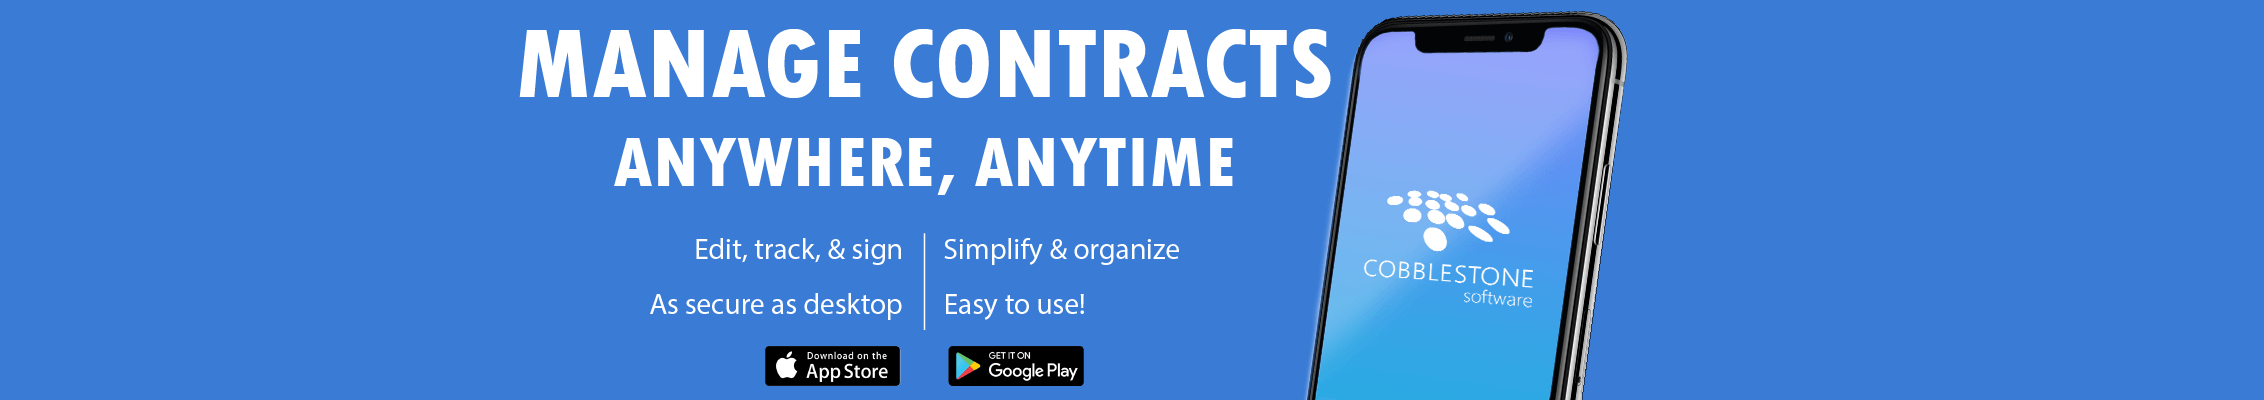 Managing Contracts Anywhere, Anytime is Easy with CobbleStone Software